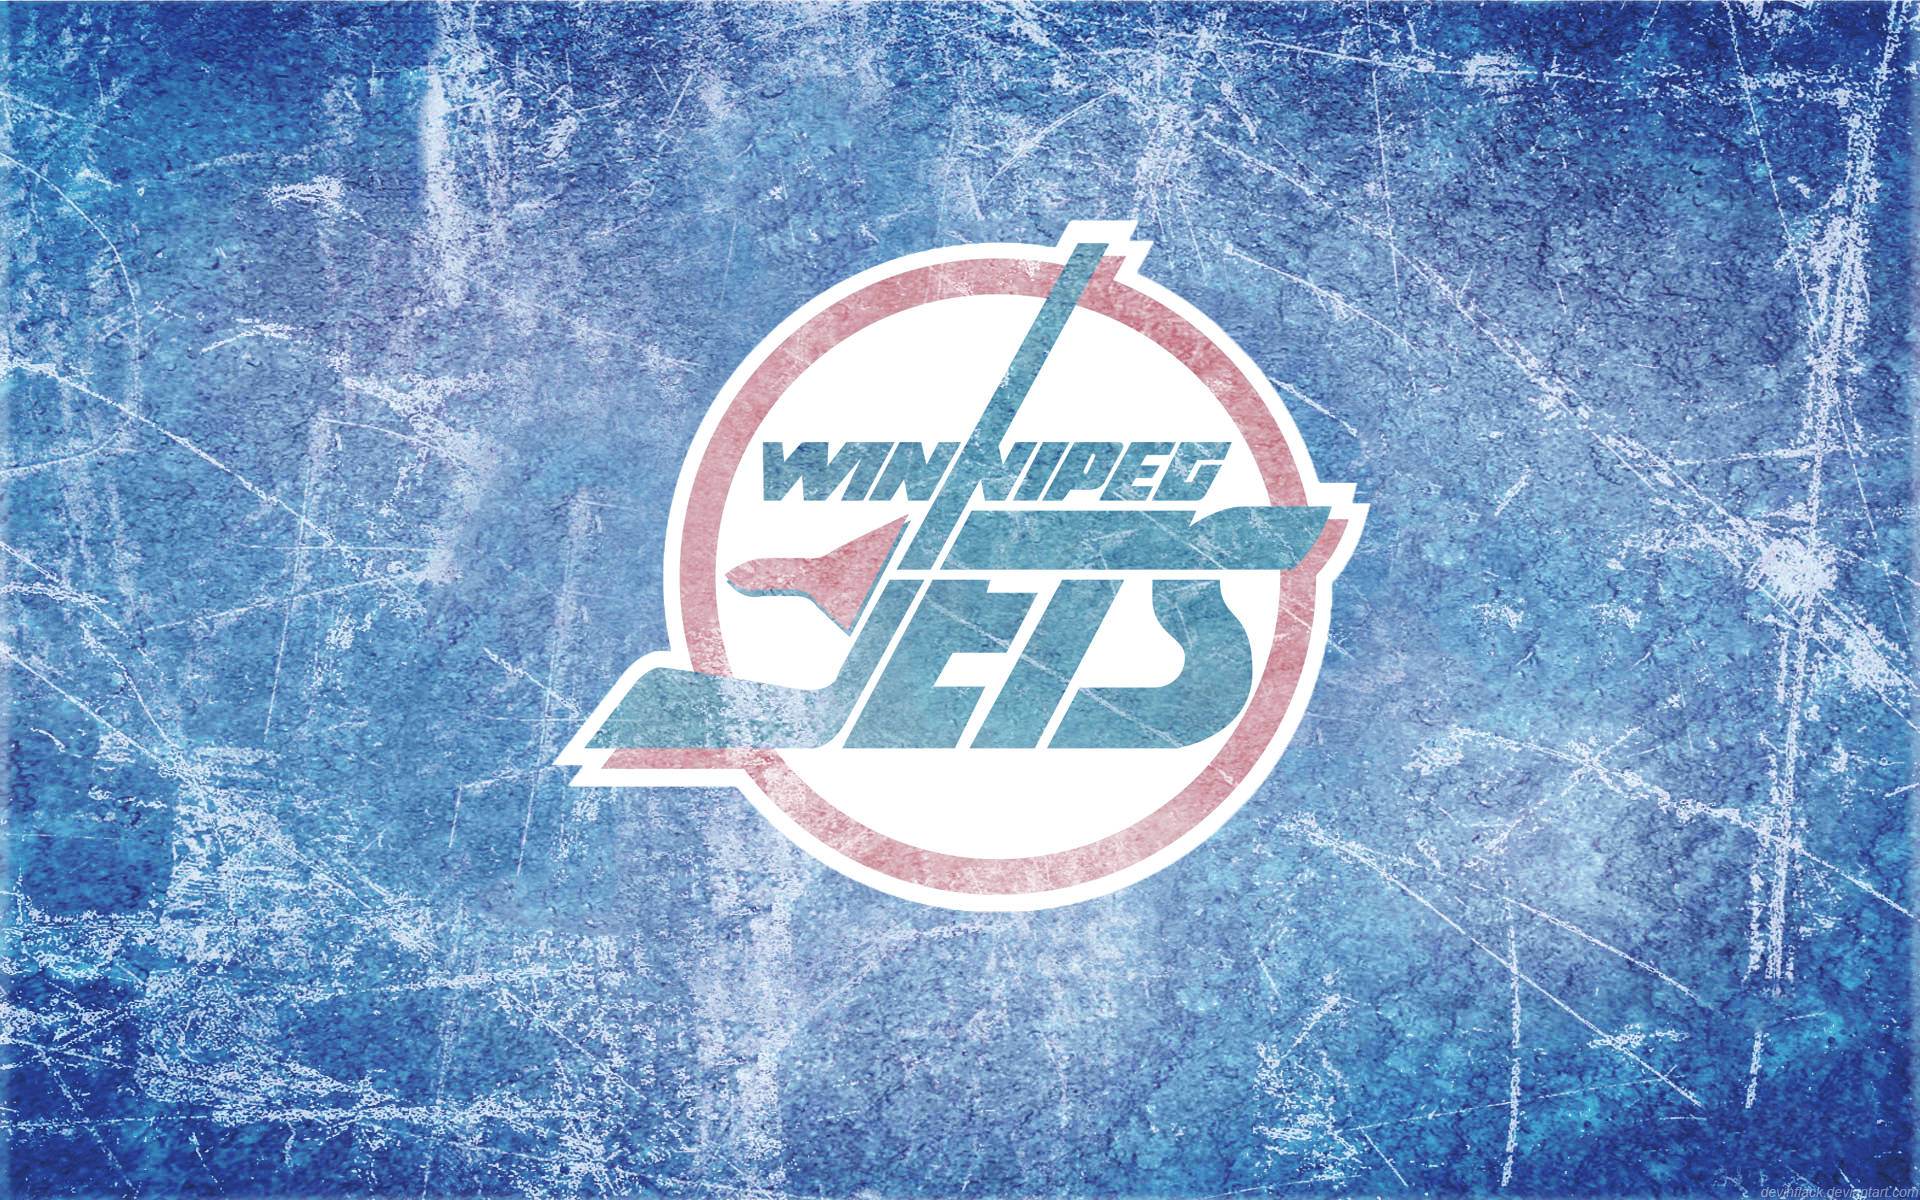 Exciting Winnipeg Jets Game On Home Ice Rink Background